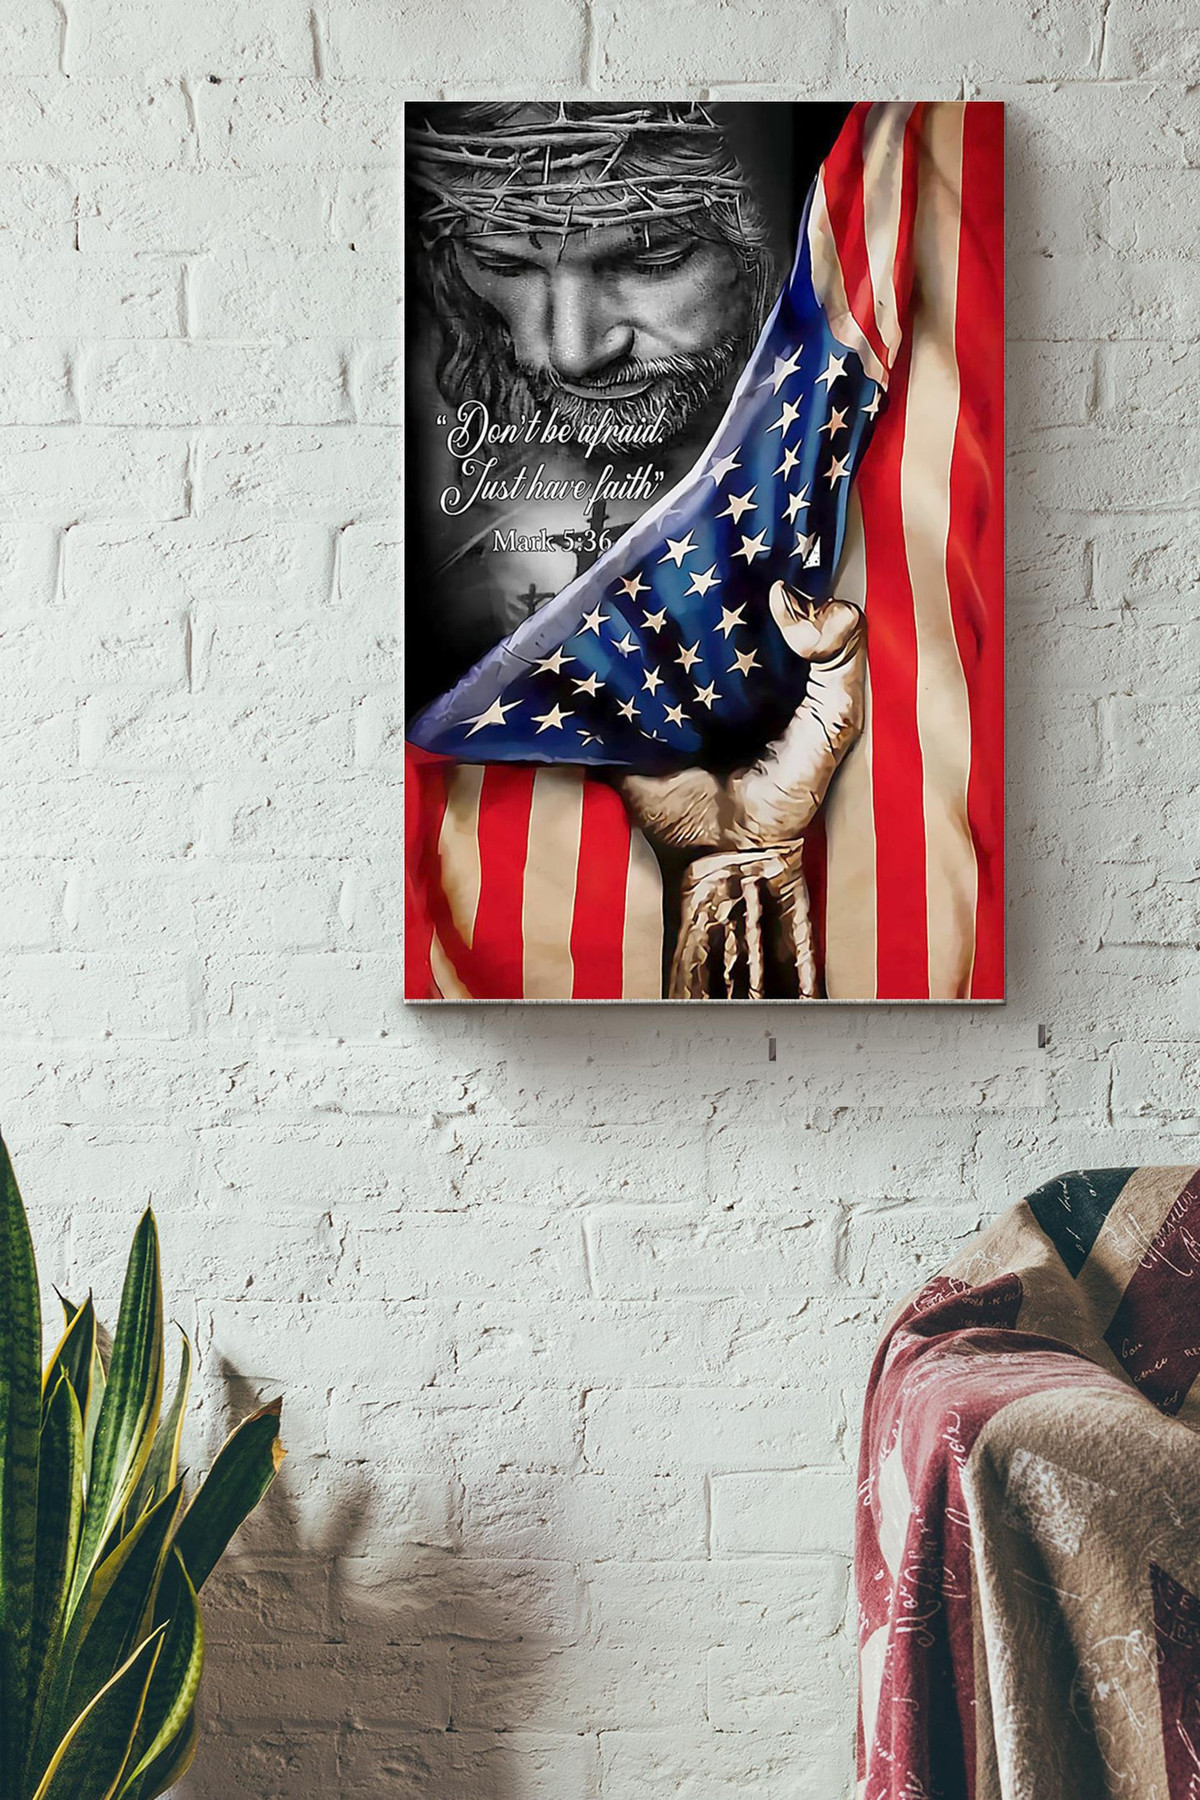 Dont Be Afraid Just Have Faith Christan With American Flag Canvas Painting Ideas, Canvas Hanging Prints, Gift Idea Framed Prints, Canvas Paintings Wrapped Canvas 8x10